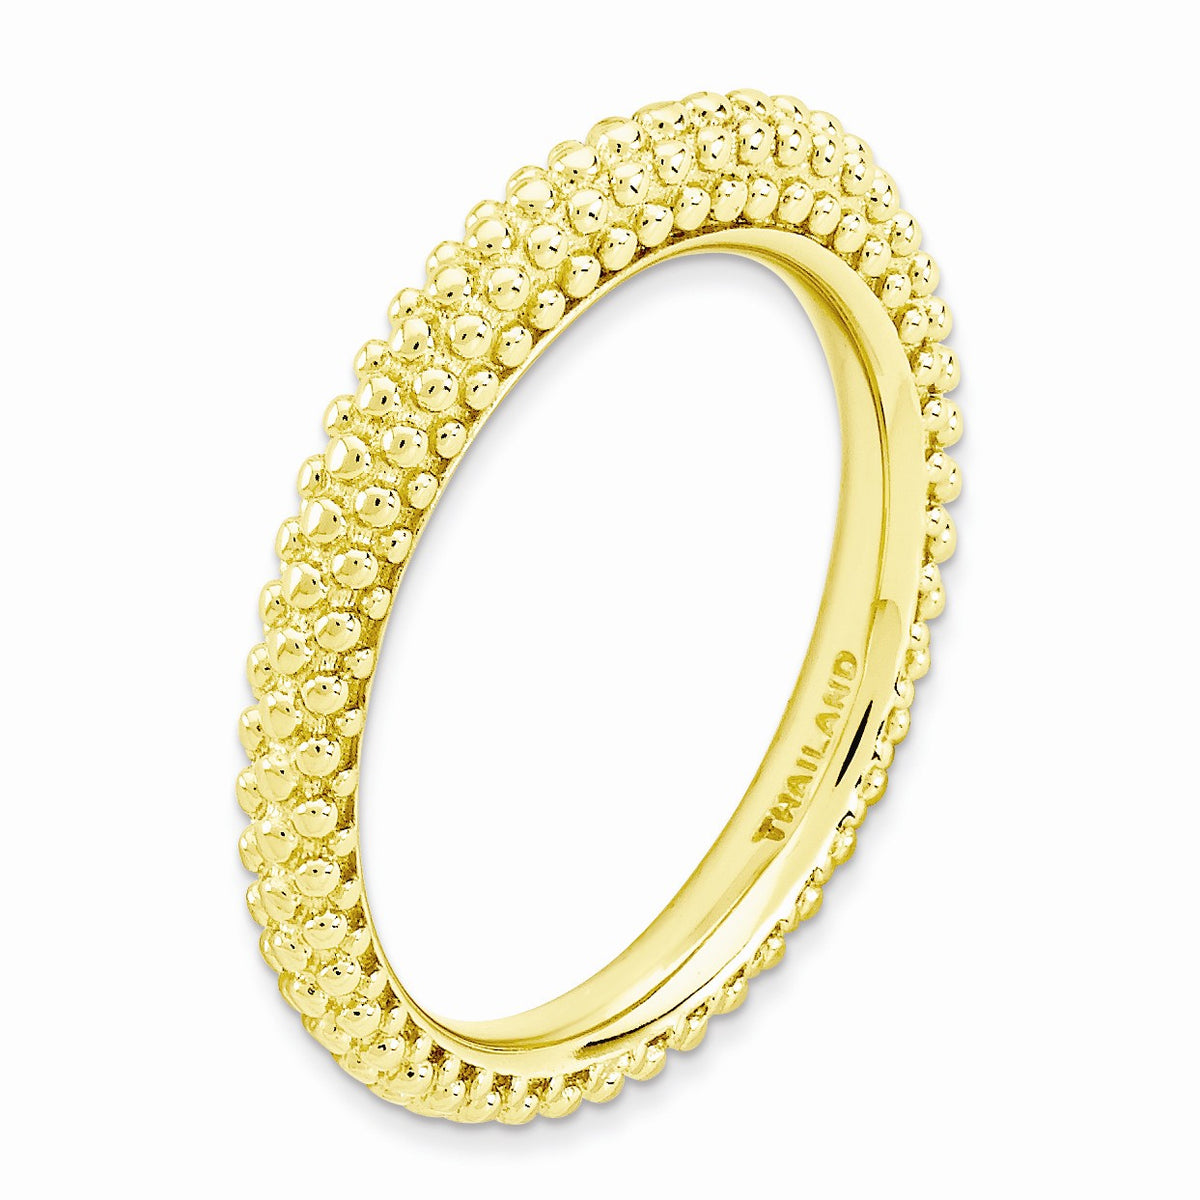 Alternate view of the Stackable 14K Yellow Gold Plated Silver Domed Milgrain Band by The Black Bow Jewelry Co.